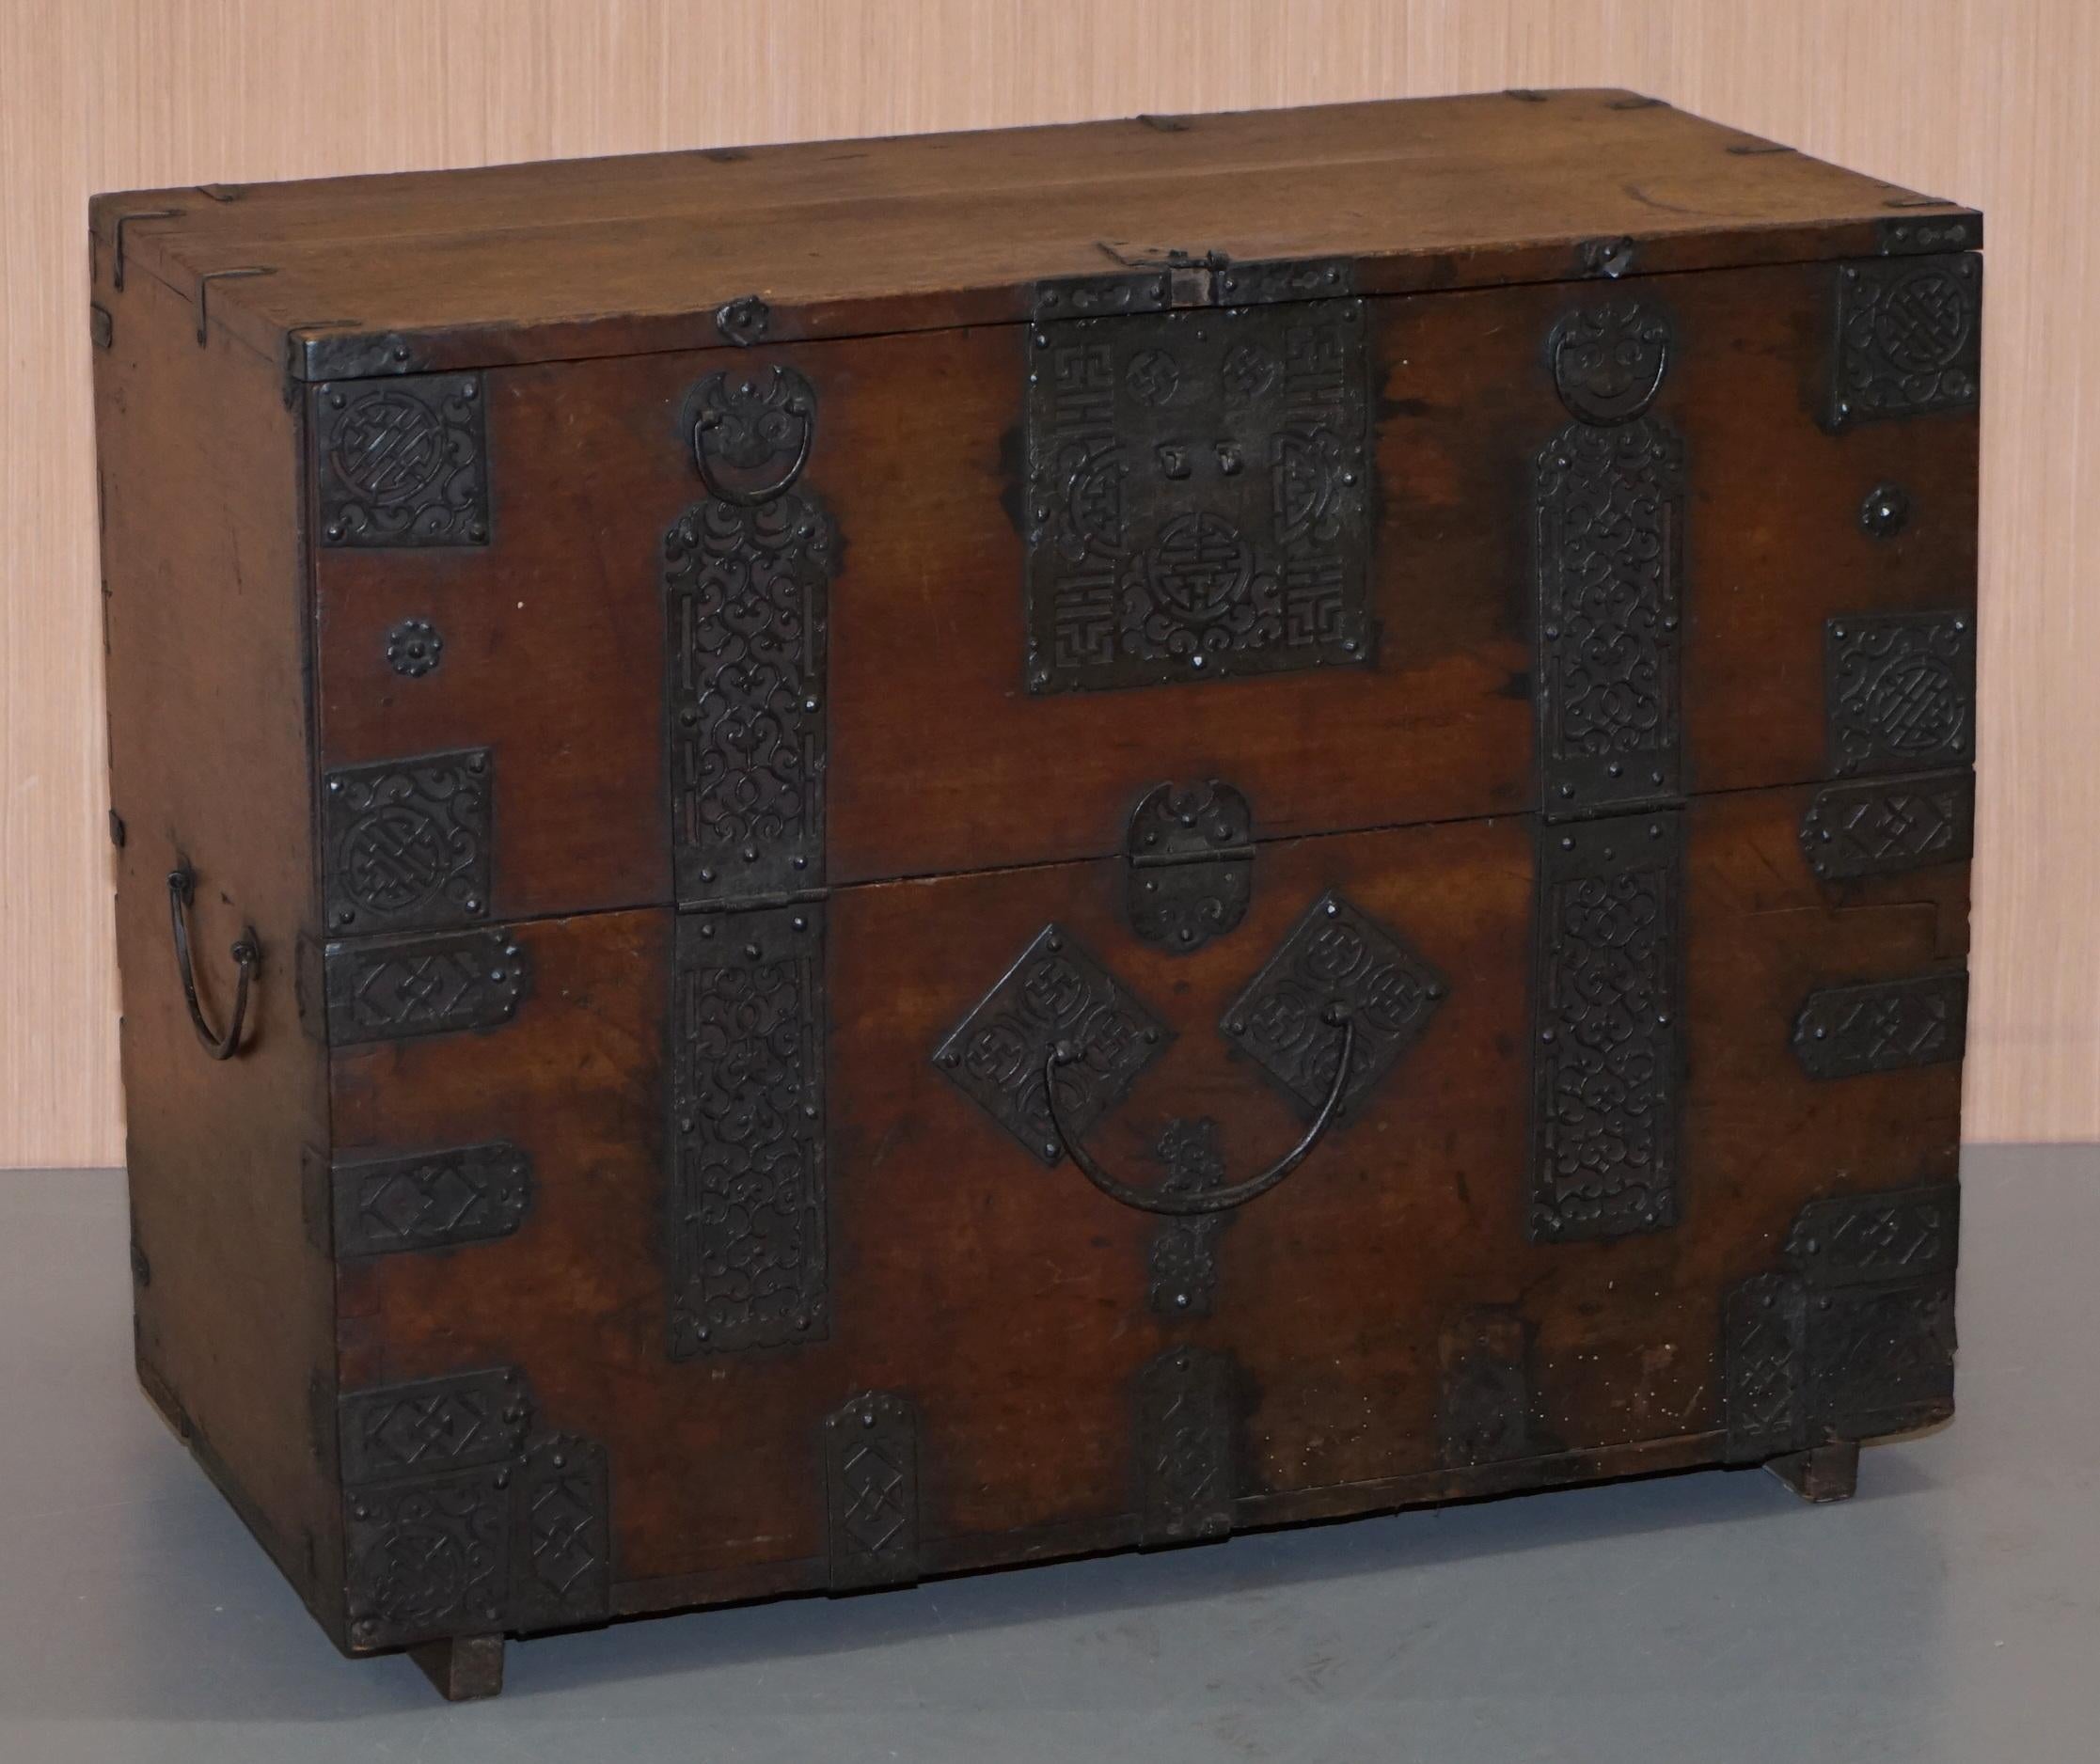 We are delighted to offer for sale this very rare circa 1840 Chinese hand carved campaign chest with ornate metal strap work depicting the Swastika

A very good looking well made and decorative piece, this is the oldest of its type that I have